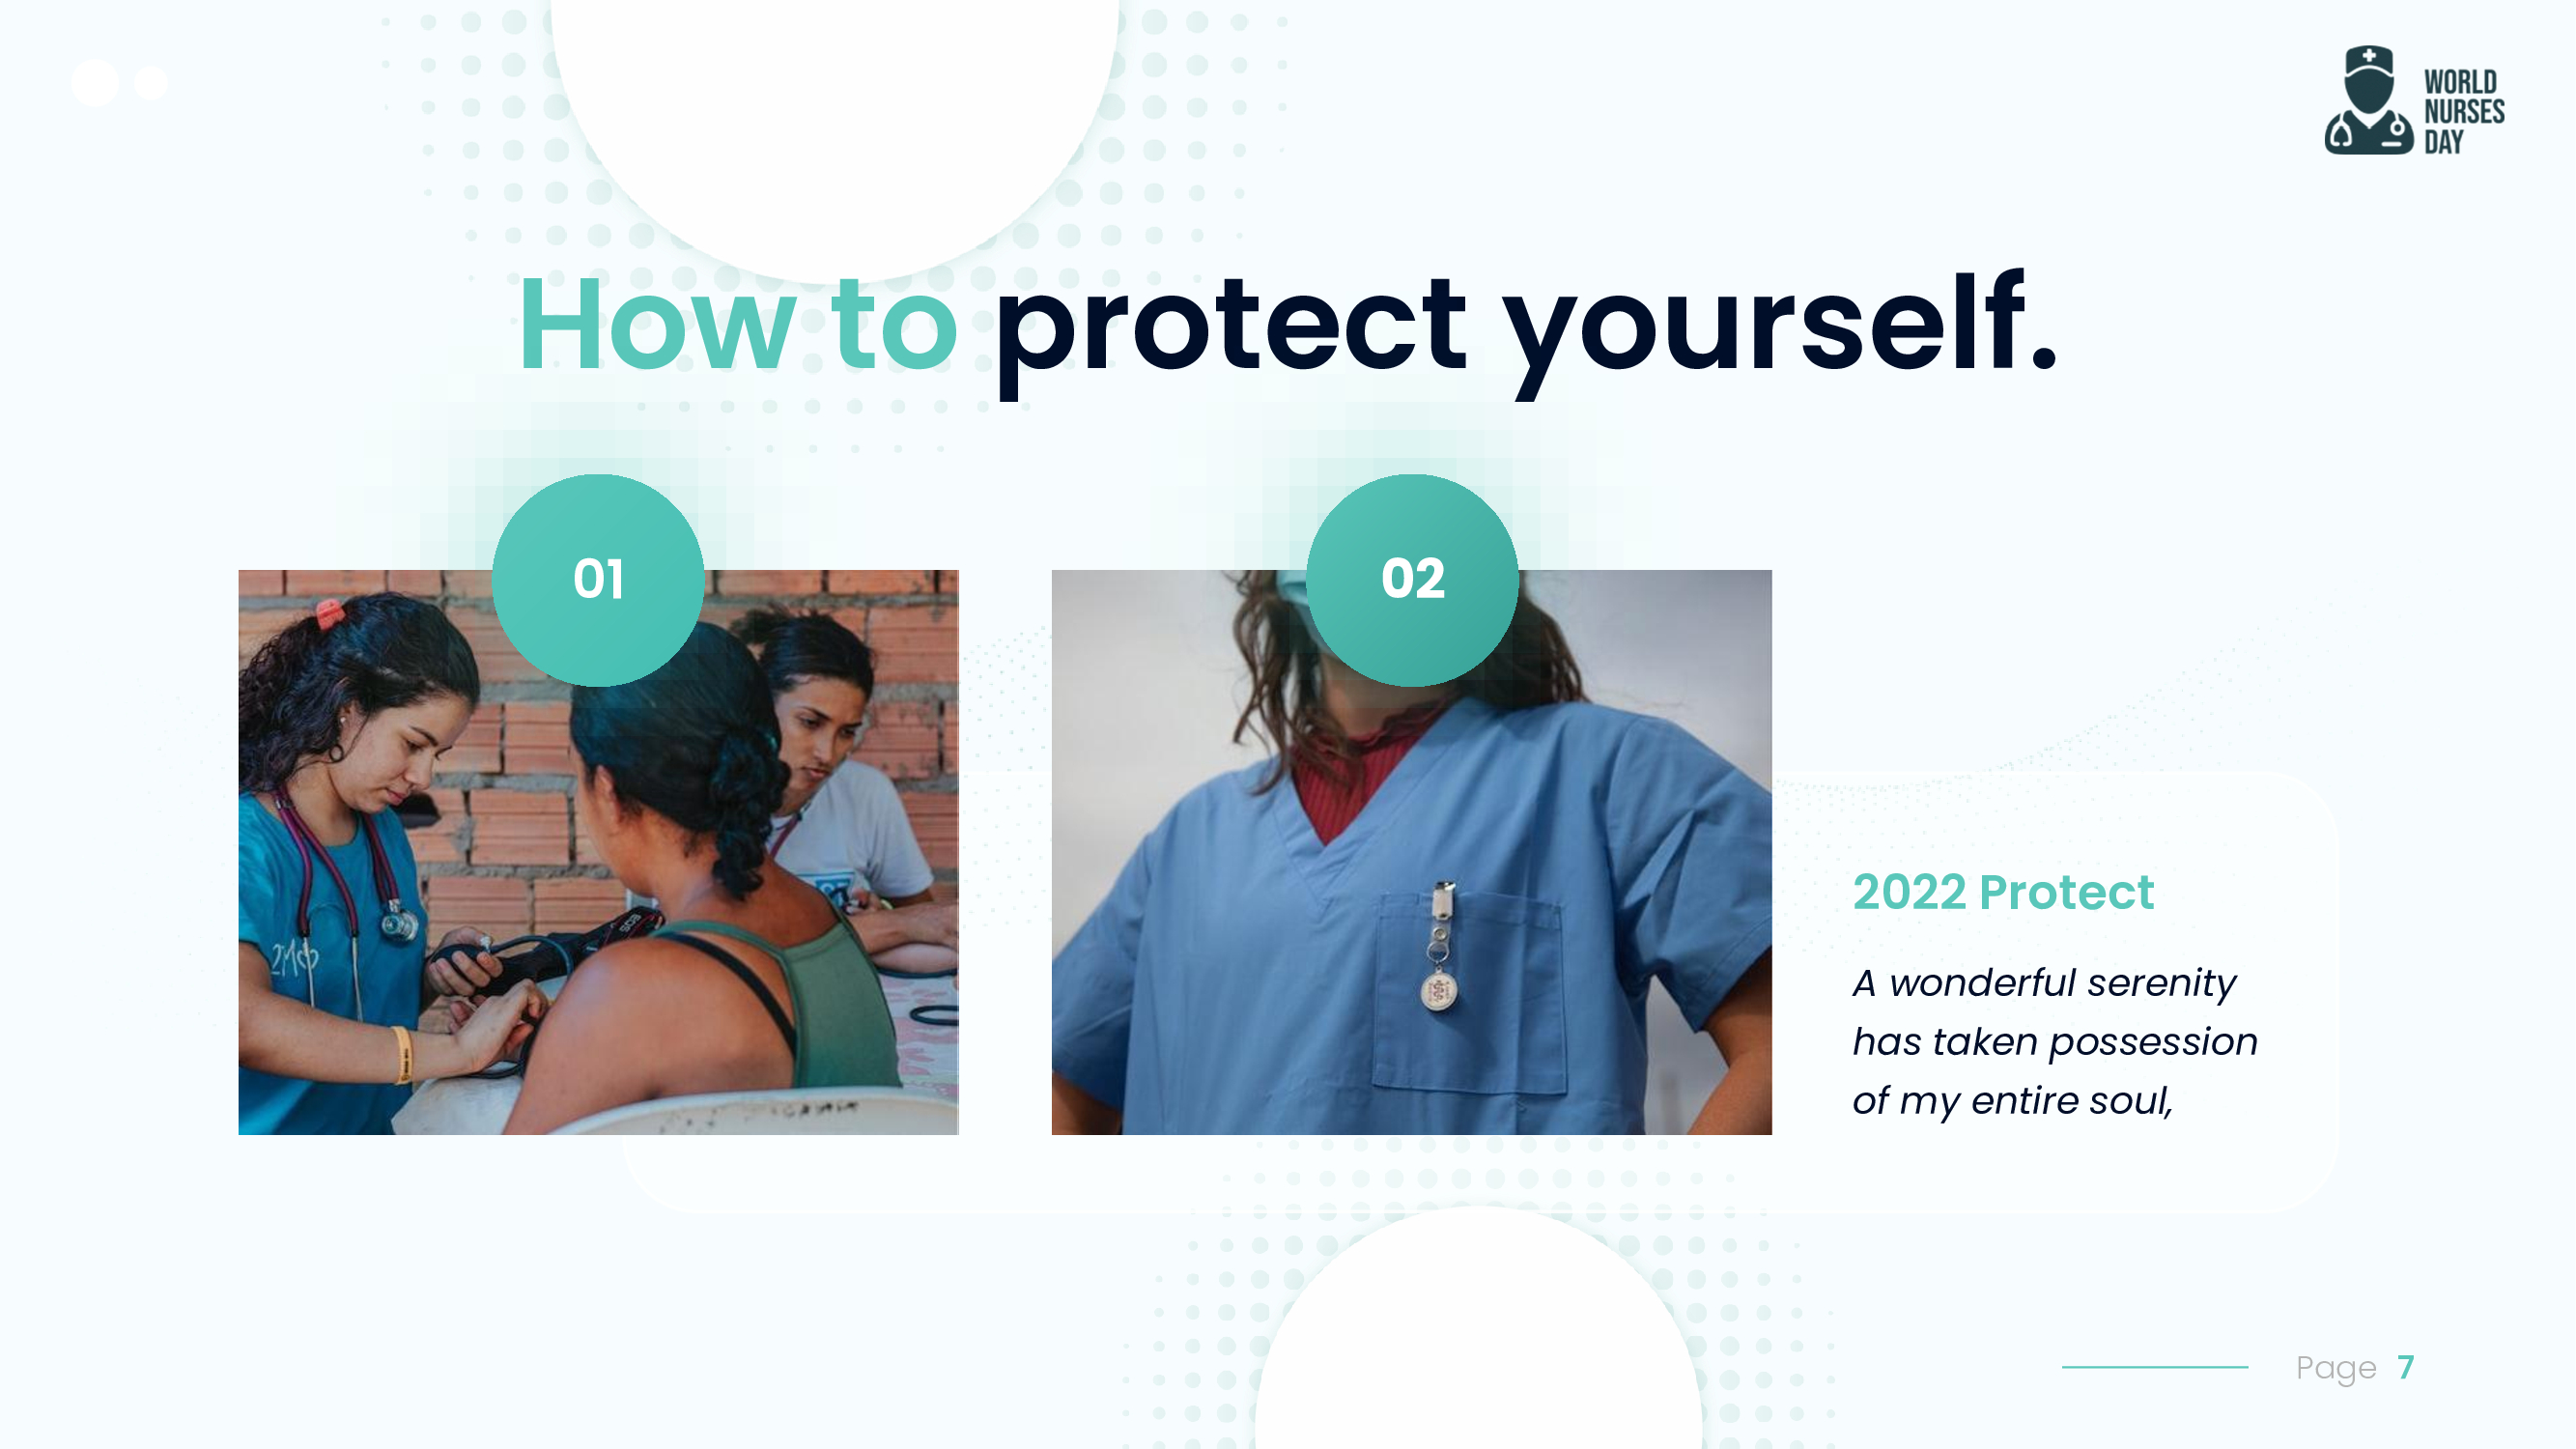 Show your audience how to protect yourself.